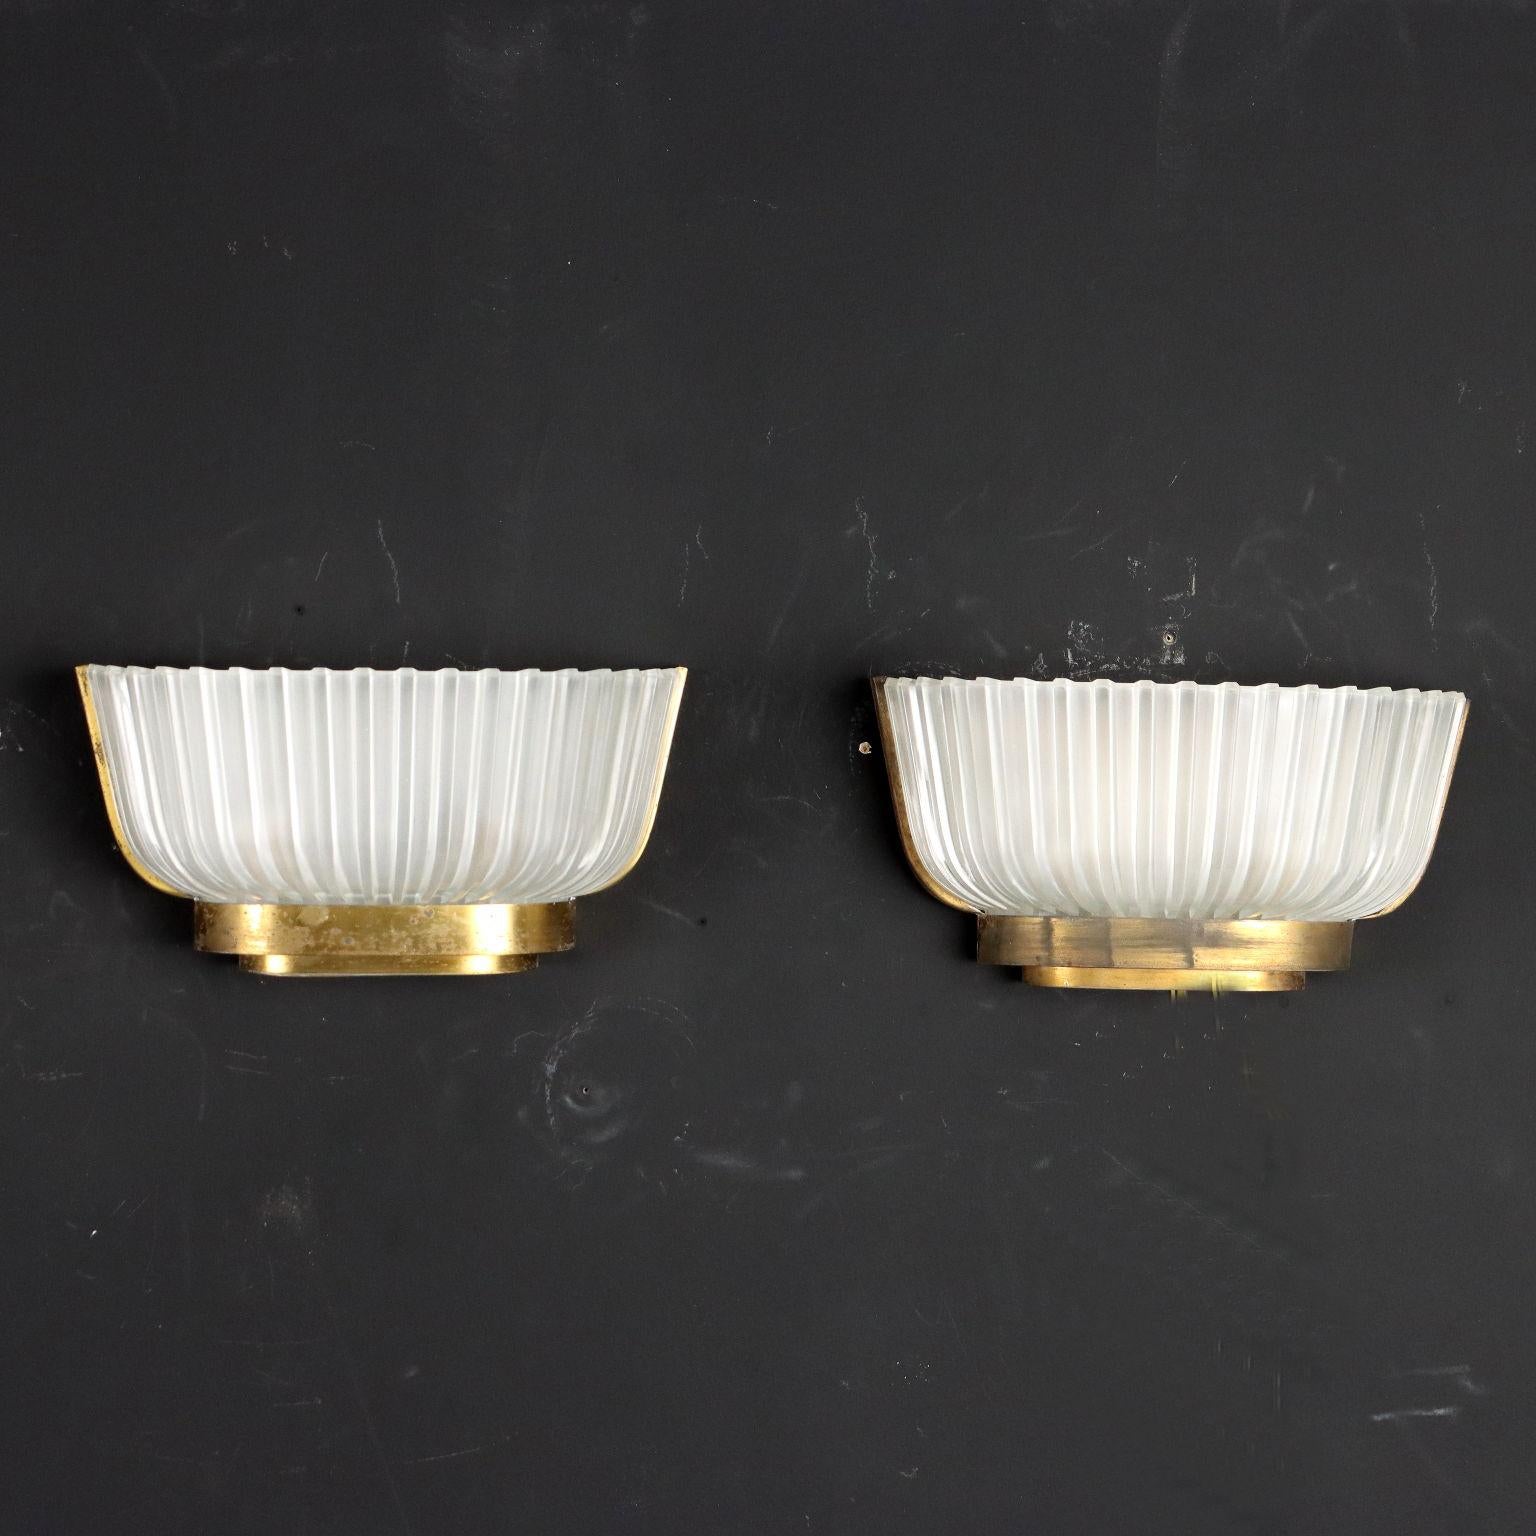 Pair of wall lamps in brass, metal and glass.